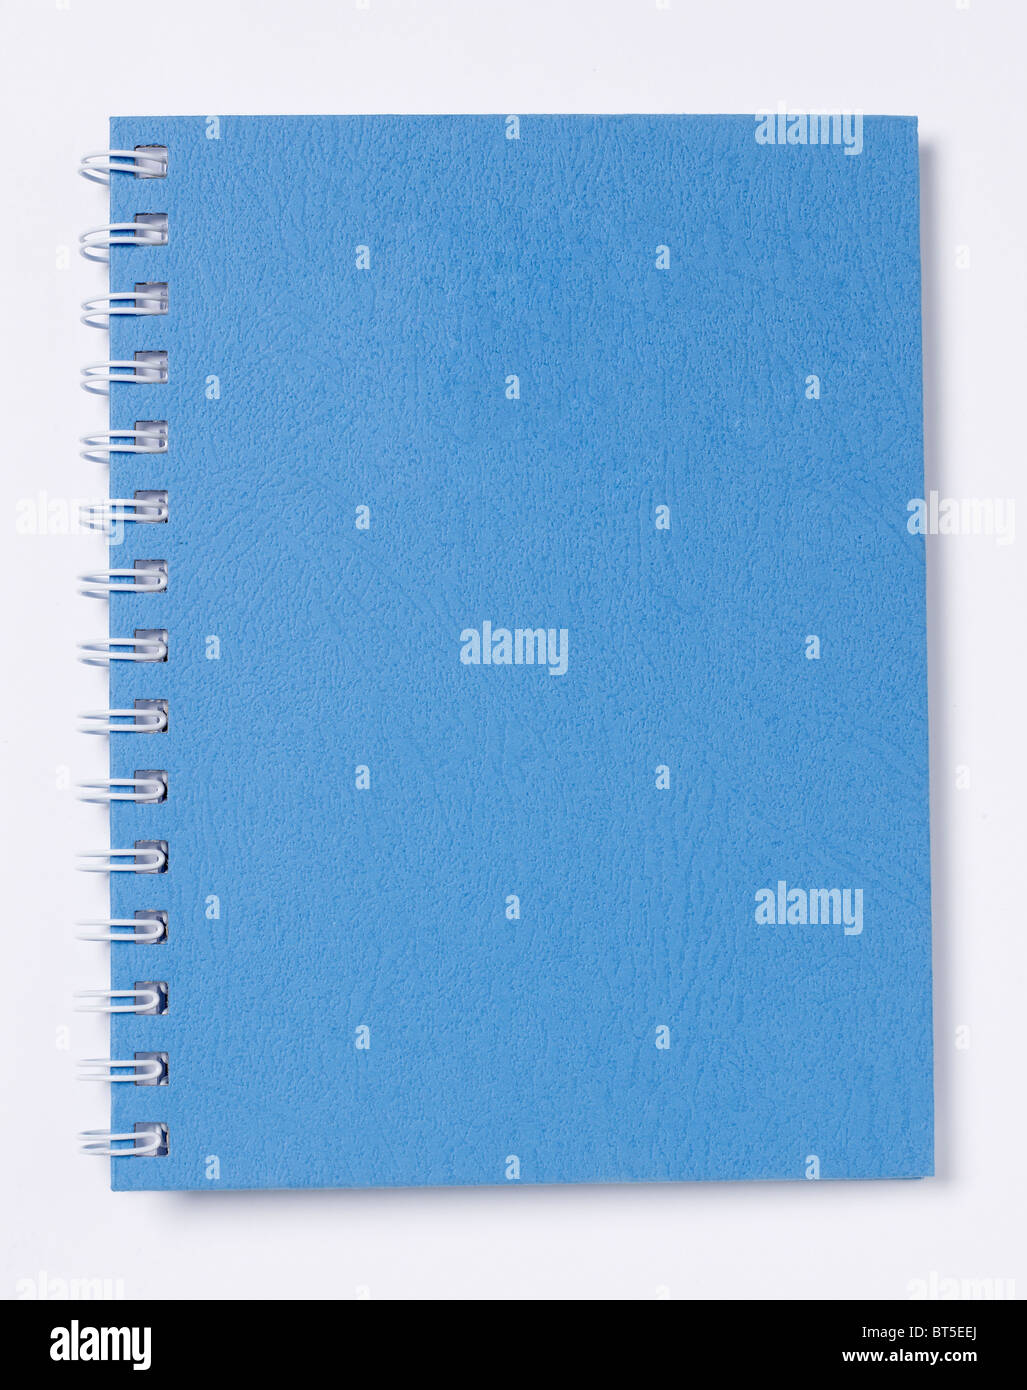 Hard Cover Book pages diary ledger elevated view Stock Photo